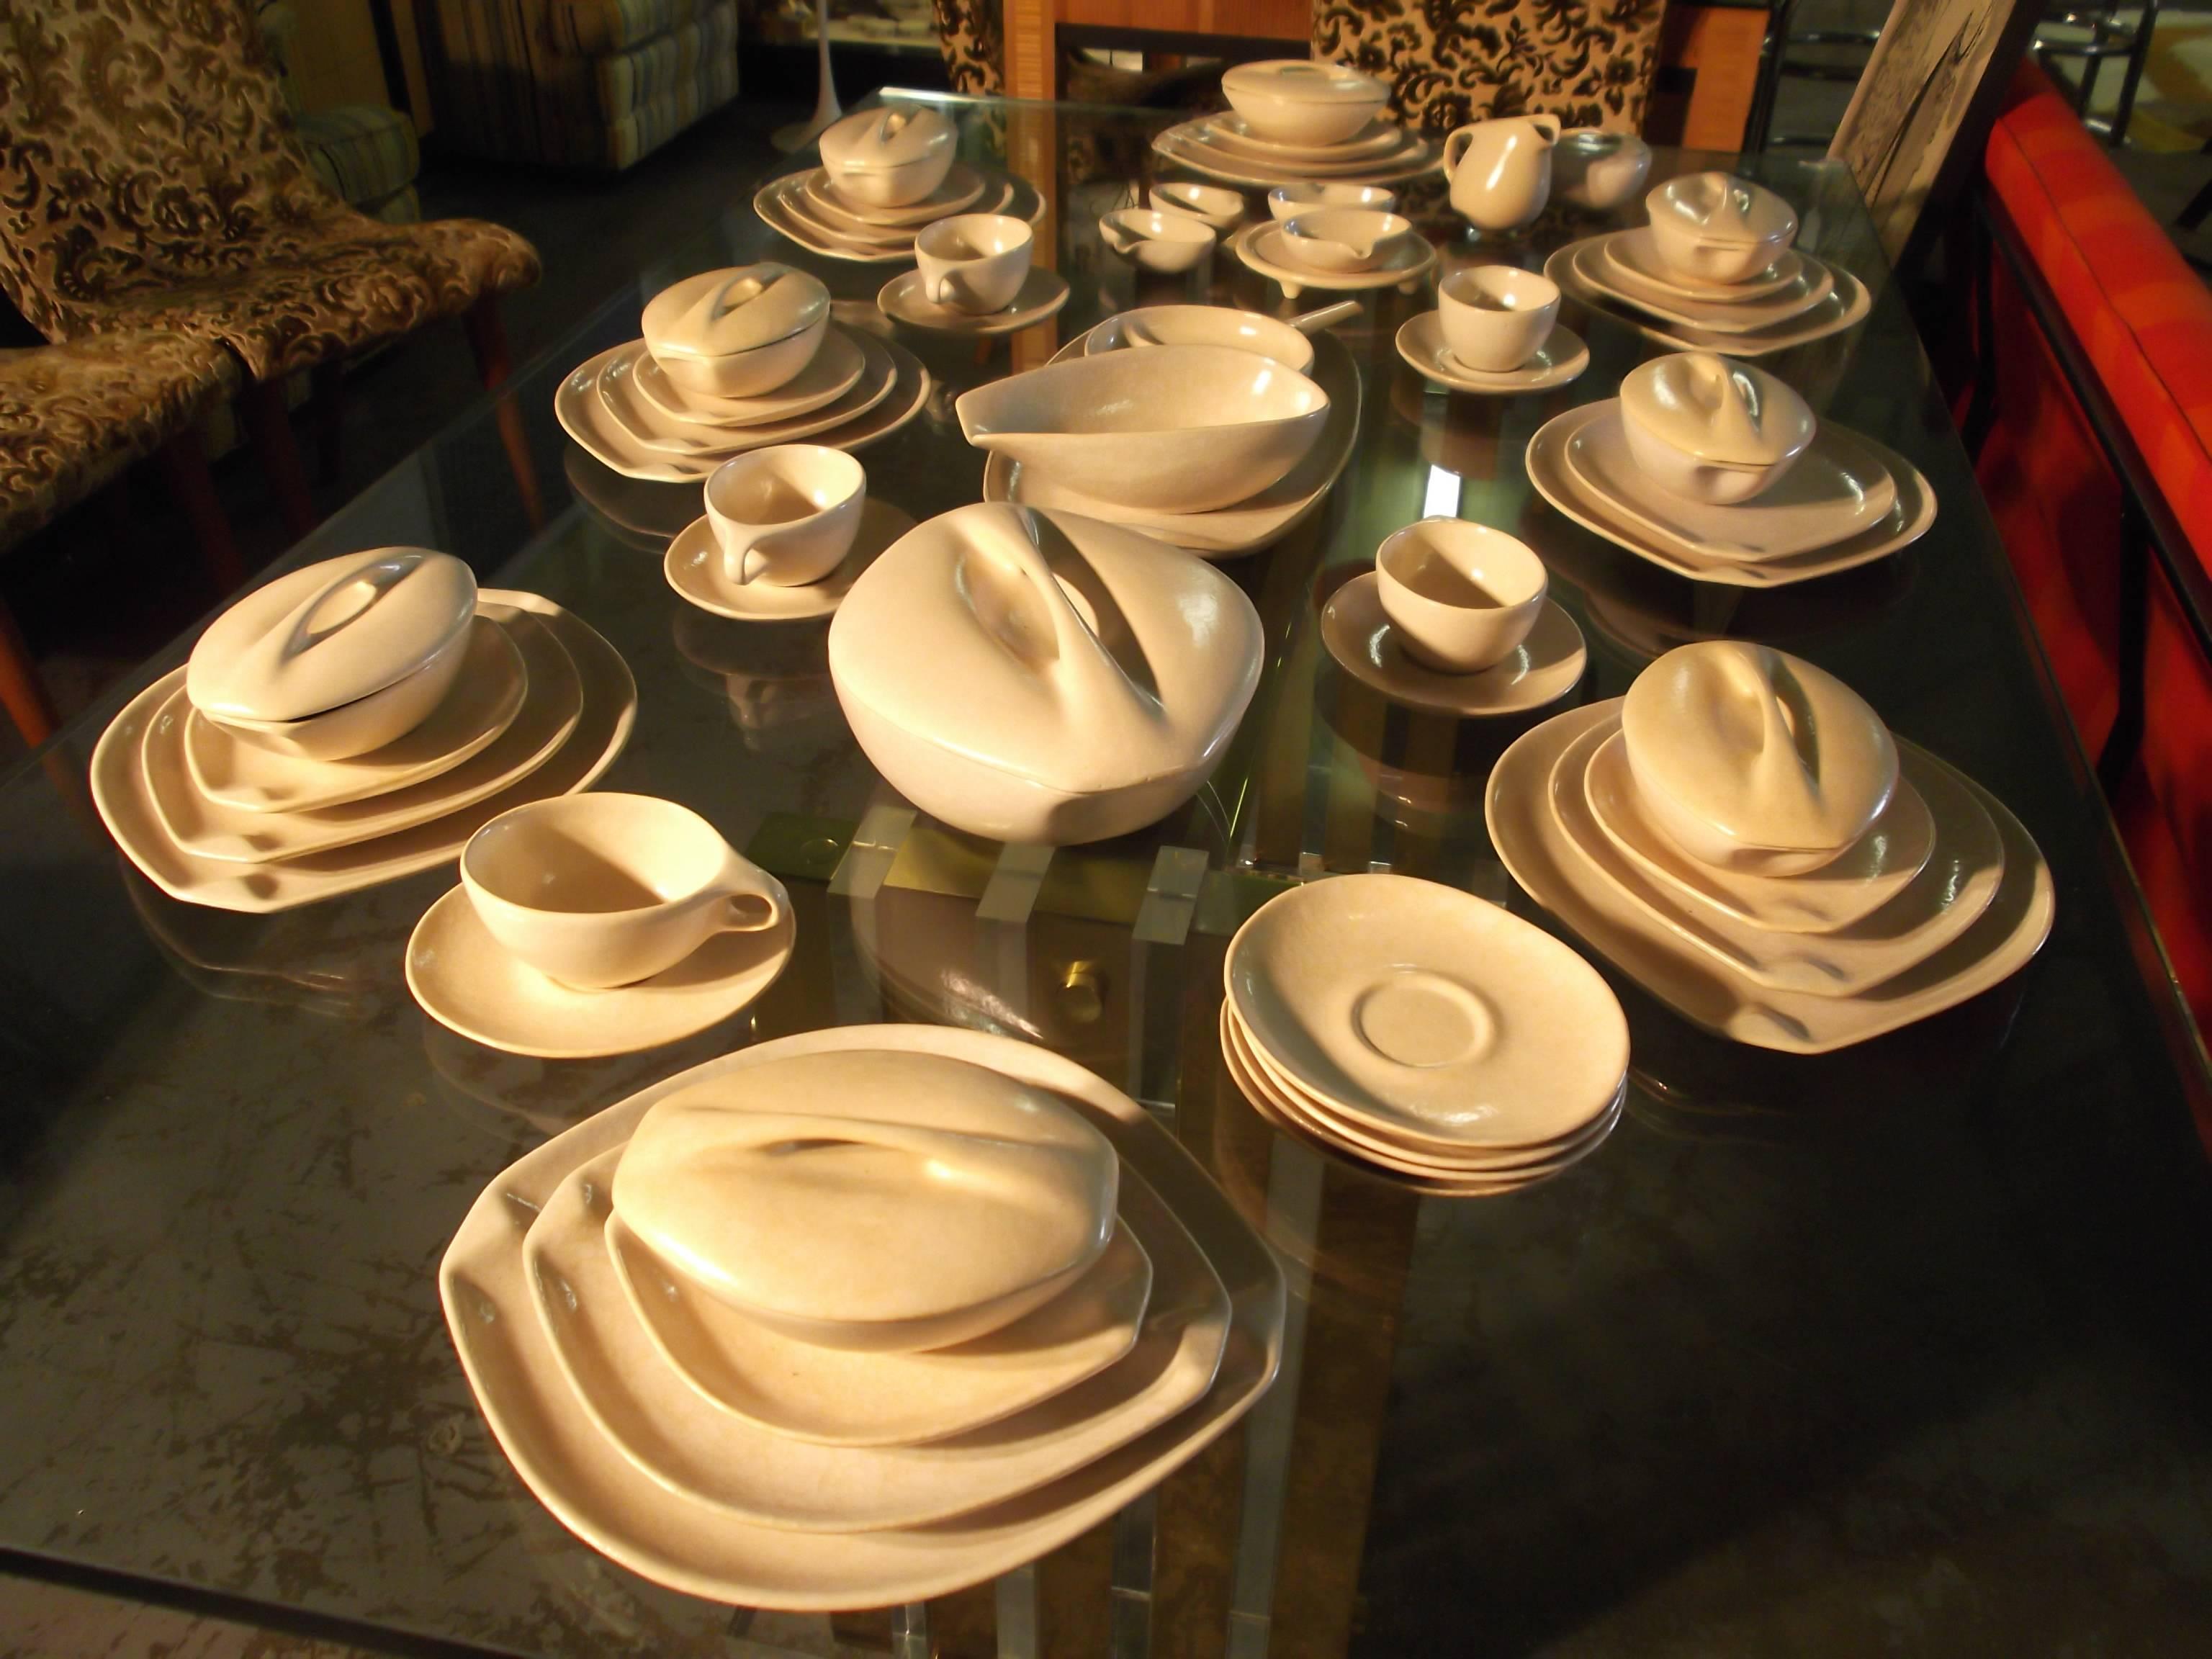 This is a fantastic full set of Ben Seibel Roseville Raymor dinnerware. There are 56 pcs. in all. There are eight-place settings with few missing pieces. It is in the off-white color with a mottled finish. The forms are all elongated! The dinner